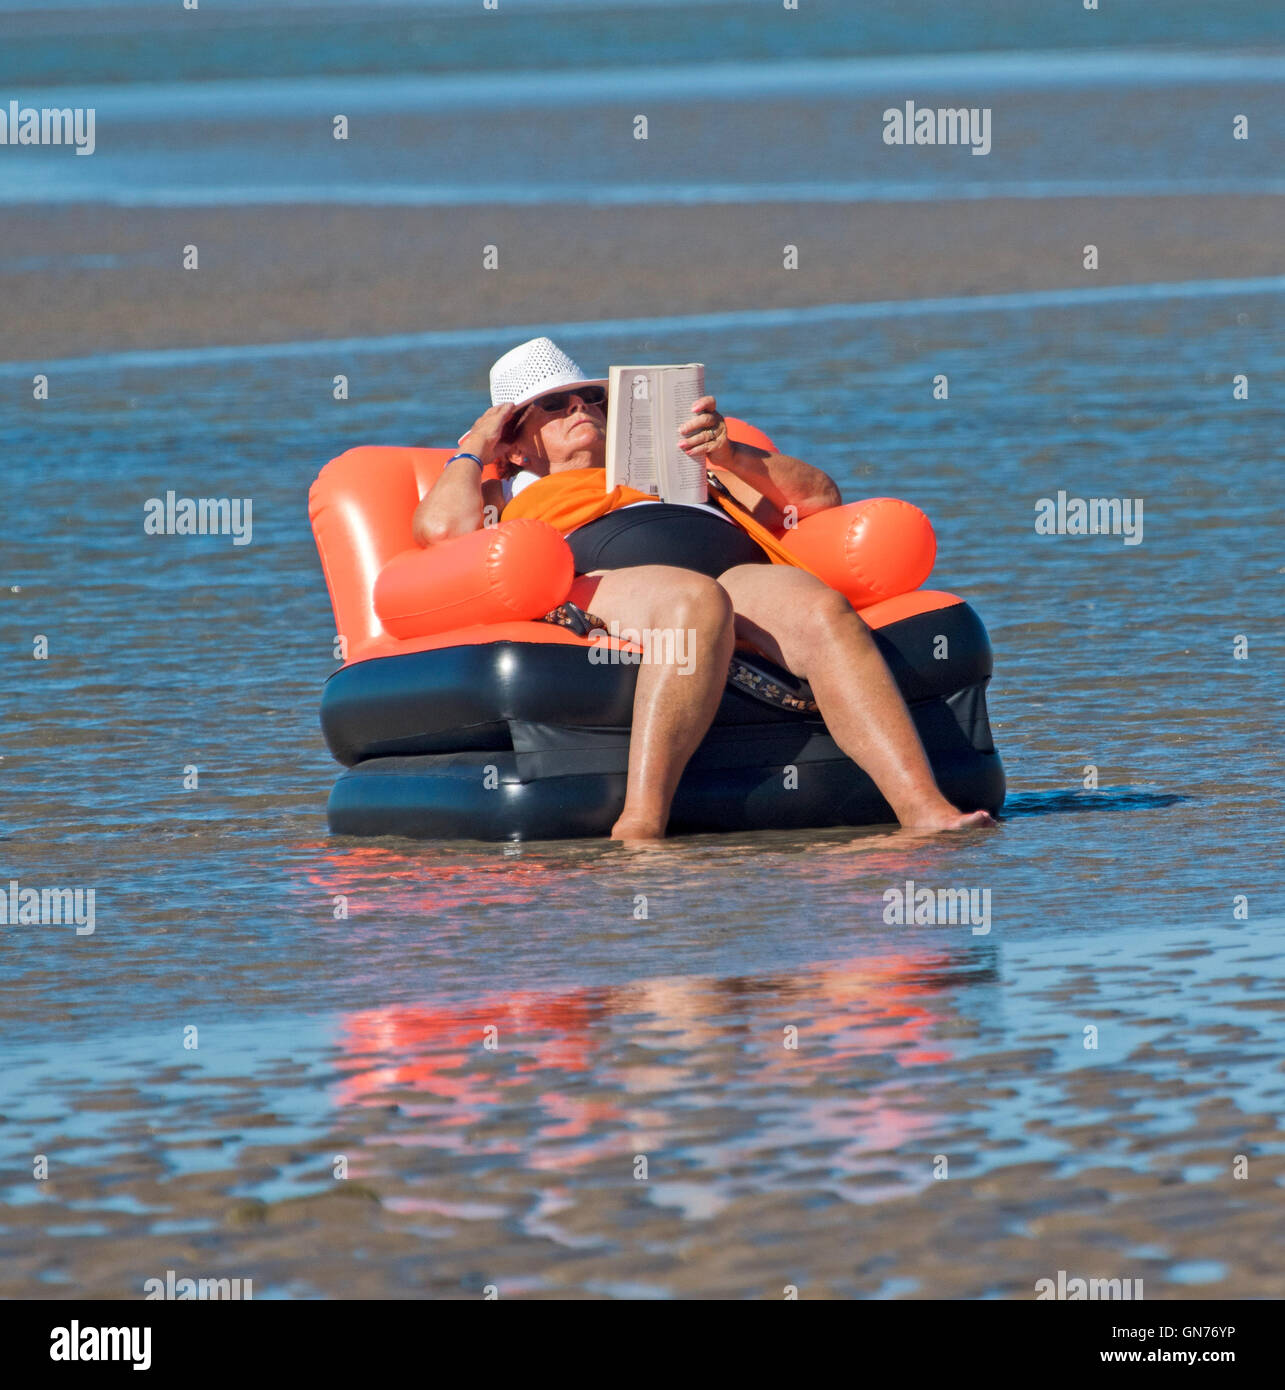 Overweight woman wearing shorts, colourful top & hat seated on inflatable chair reading book at beach in Australia Stock Photo